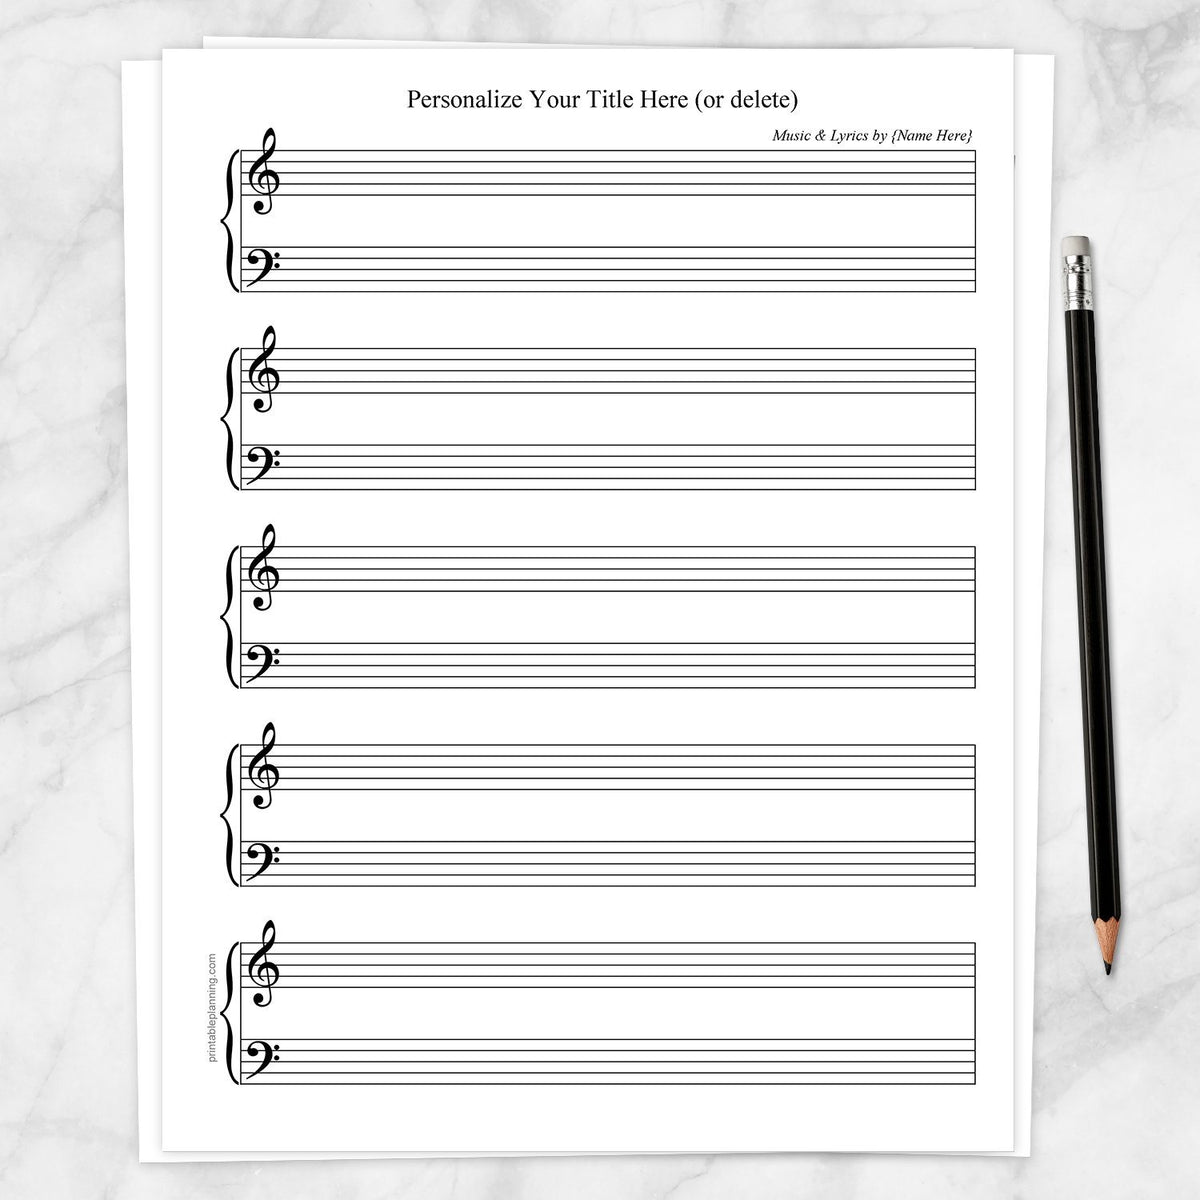 personalized-blank-piano-and-vocals-sheet-music-printable-at